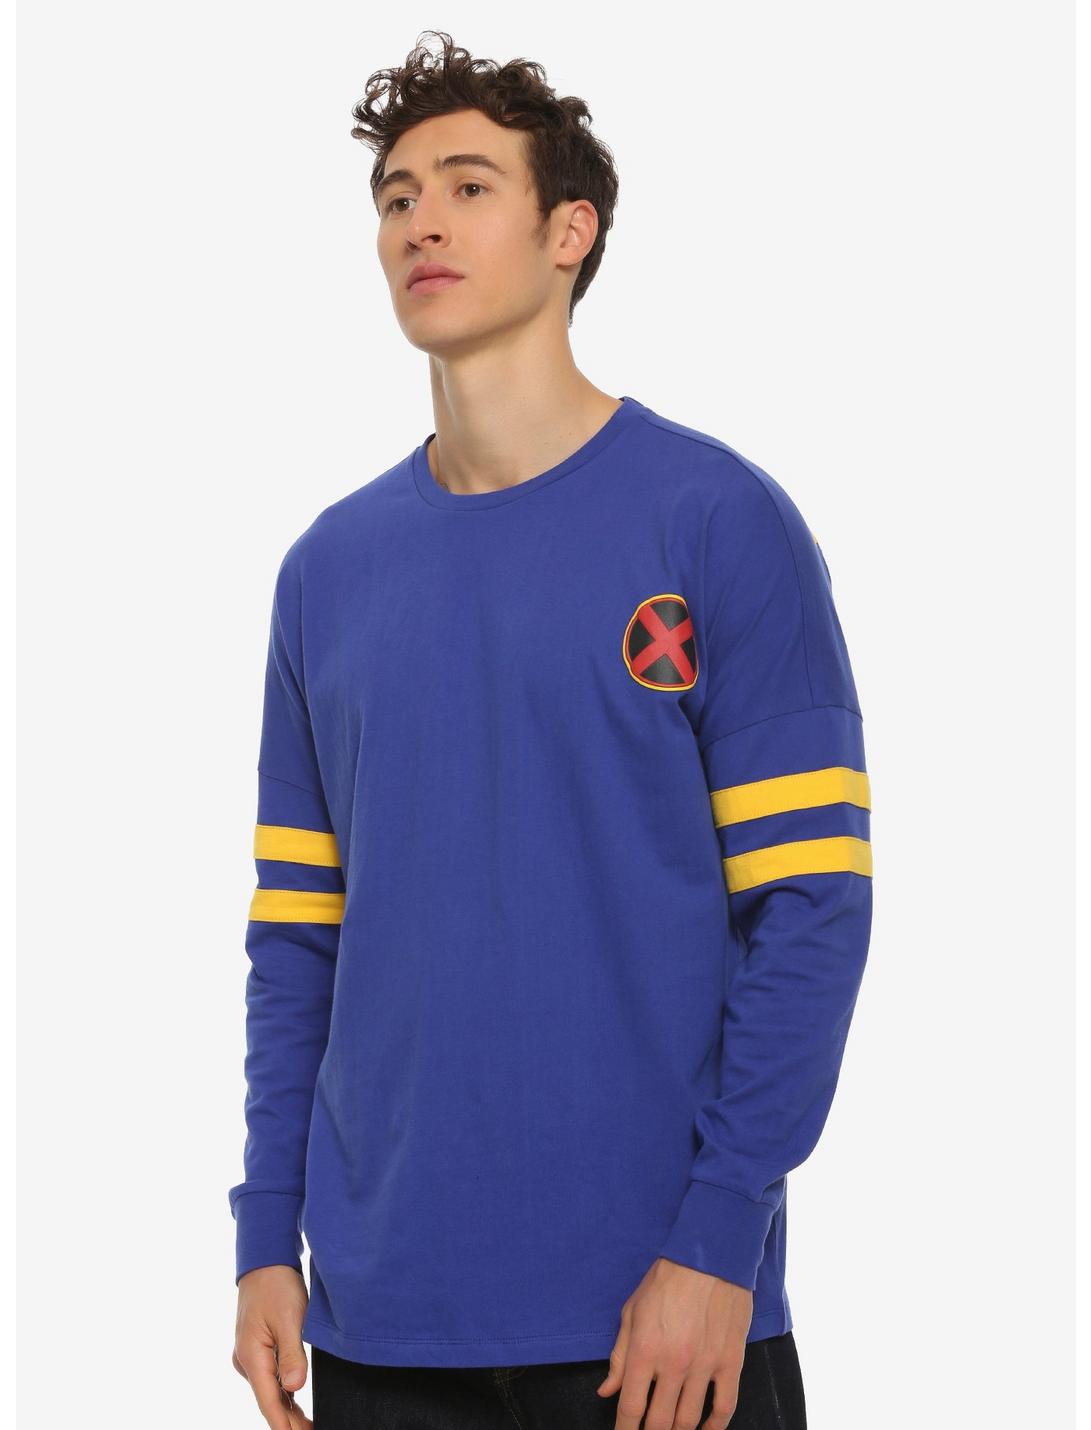 Marvel X-Men Xavier Institute for Higher Learning Hype Jersey - BoxLunch Exclusive, BLUE, hi-res